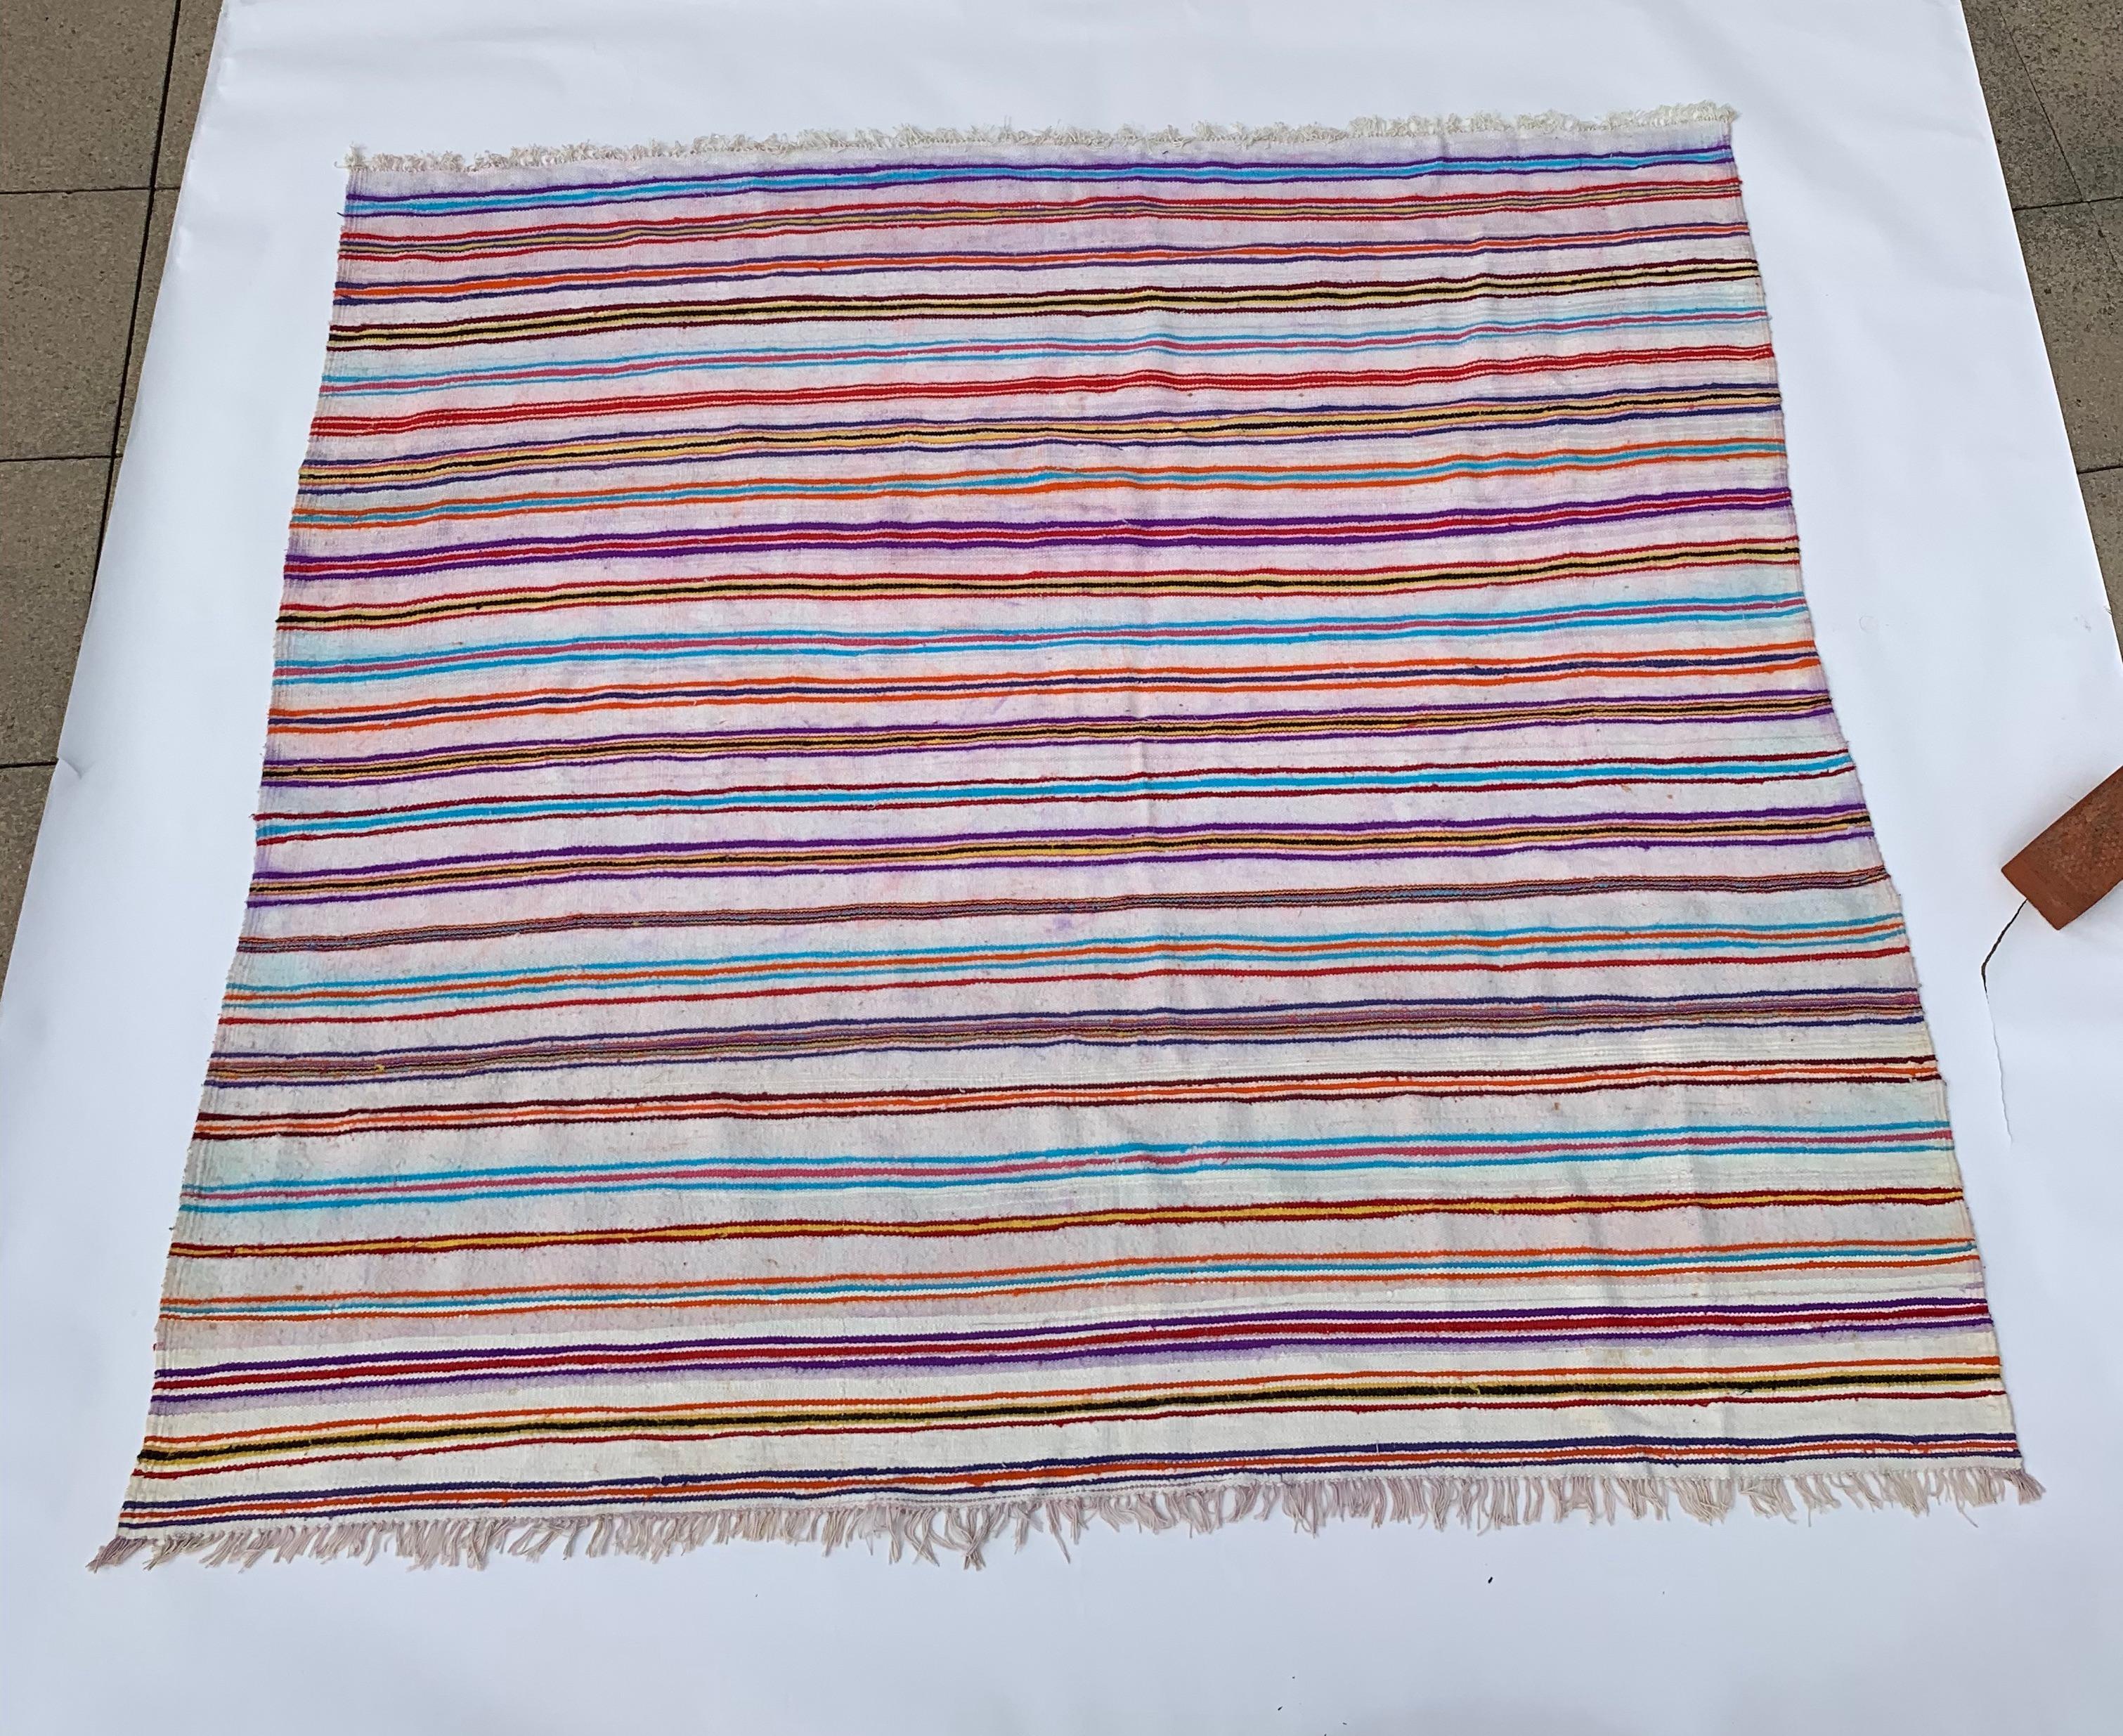 This vintage Berber rug from Northern Algeria features a striped design with colourful stripes organised in groups on a beige base. Predominantly showcasing red, blue, and purple, the rug creates visual interest, versatility and a balanced aesthetic